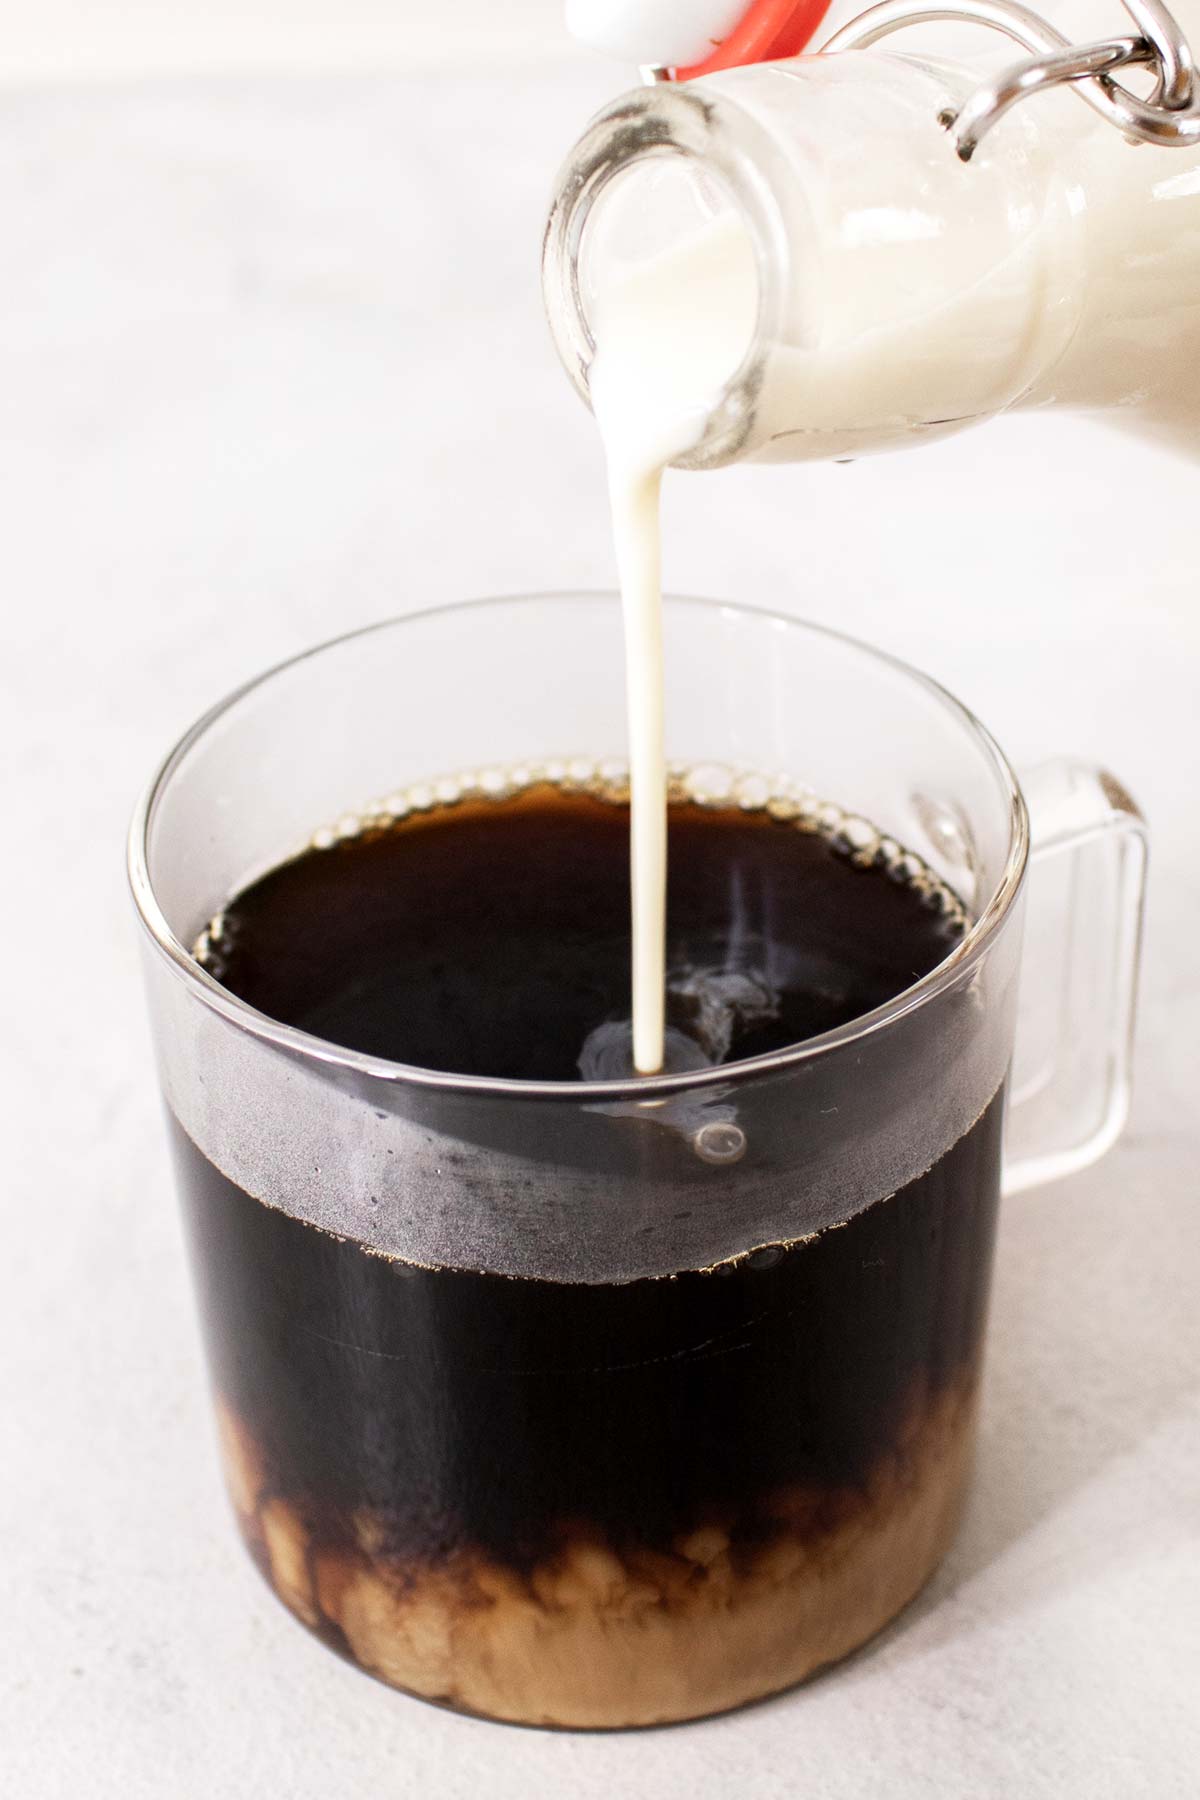 Pouring French vanilla creamer into a cup of coffee.